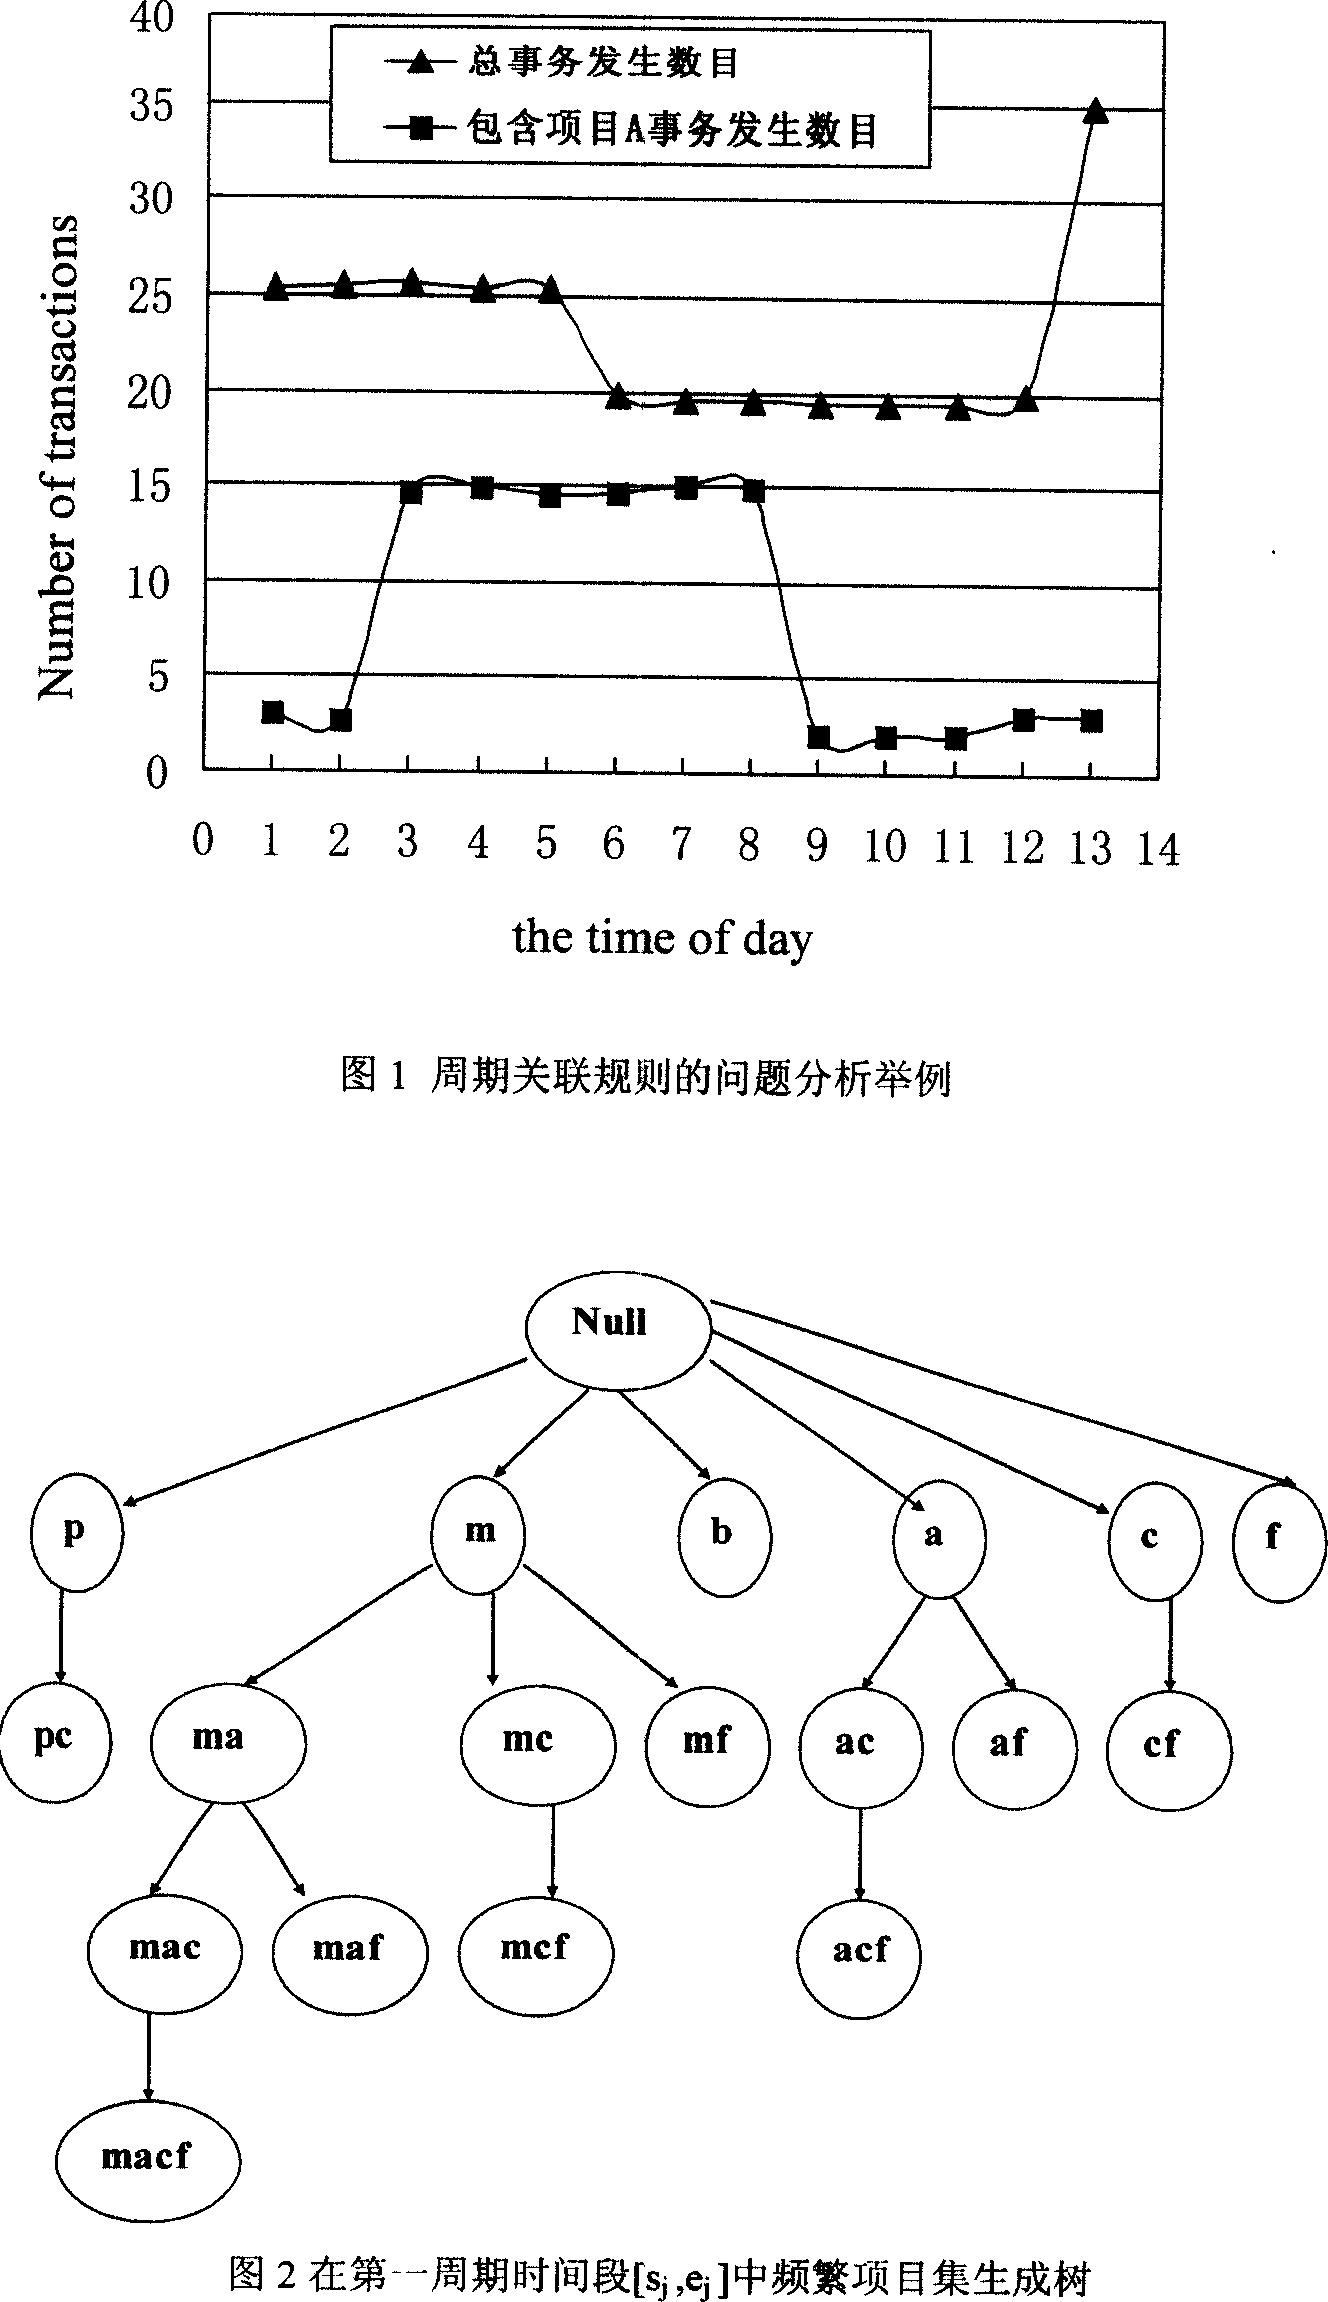 Periodic associated rule discovery algorithm based on time sequence vector diverse sequence method clustering